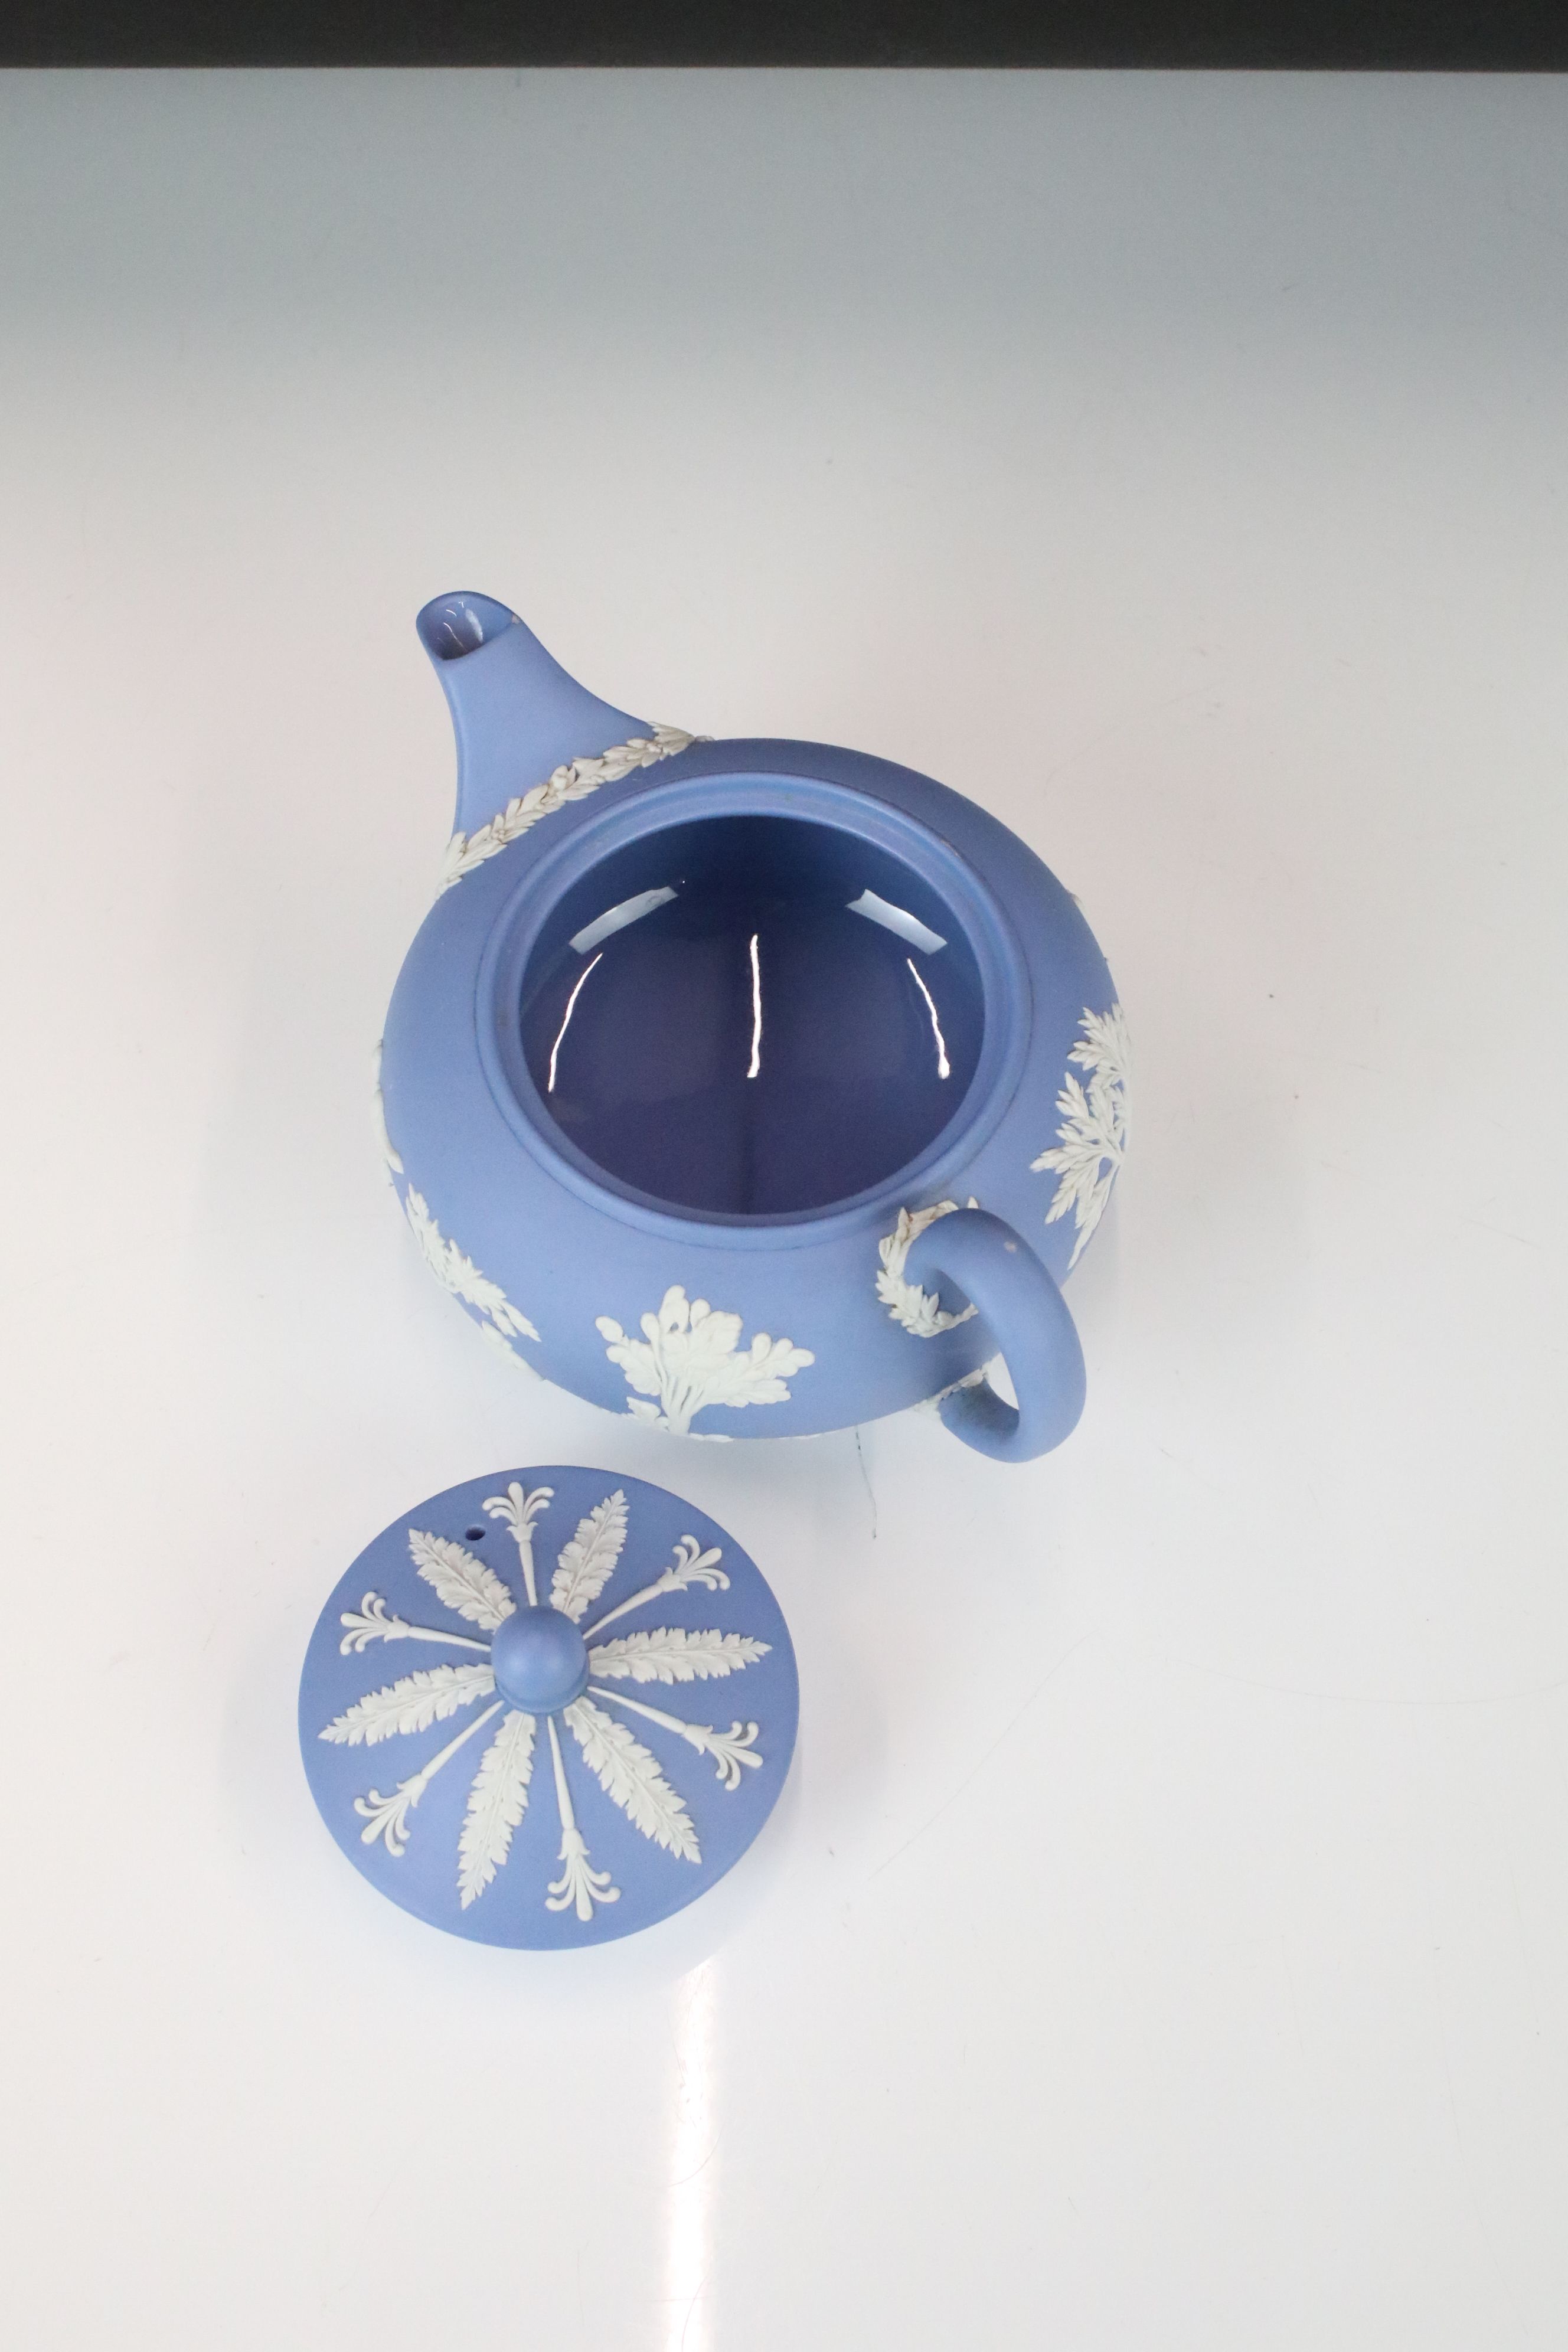 Wedgwood Jasperware Pale Blue Tea Service for 6 to include 2 x teapots & covers, 6 teacups & - Image 8 of 12